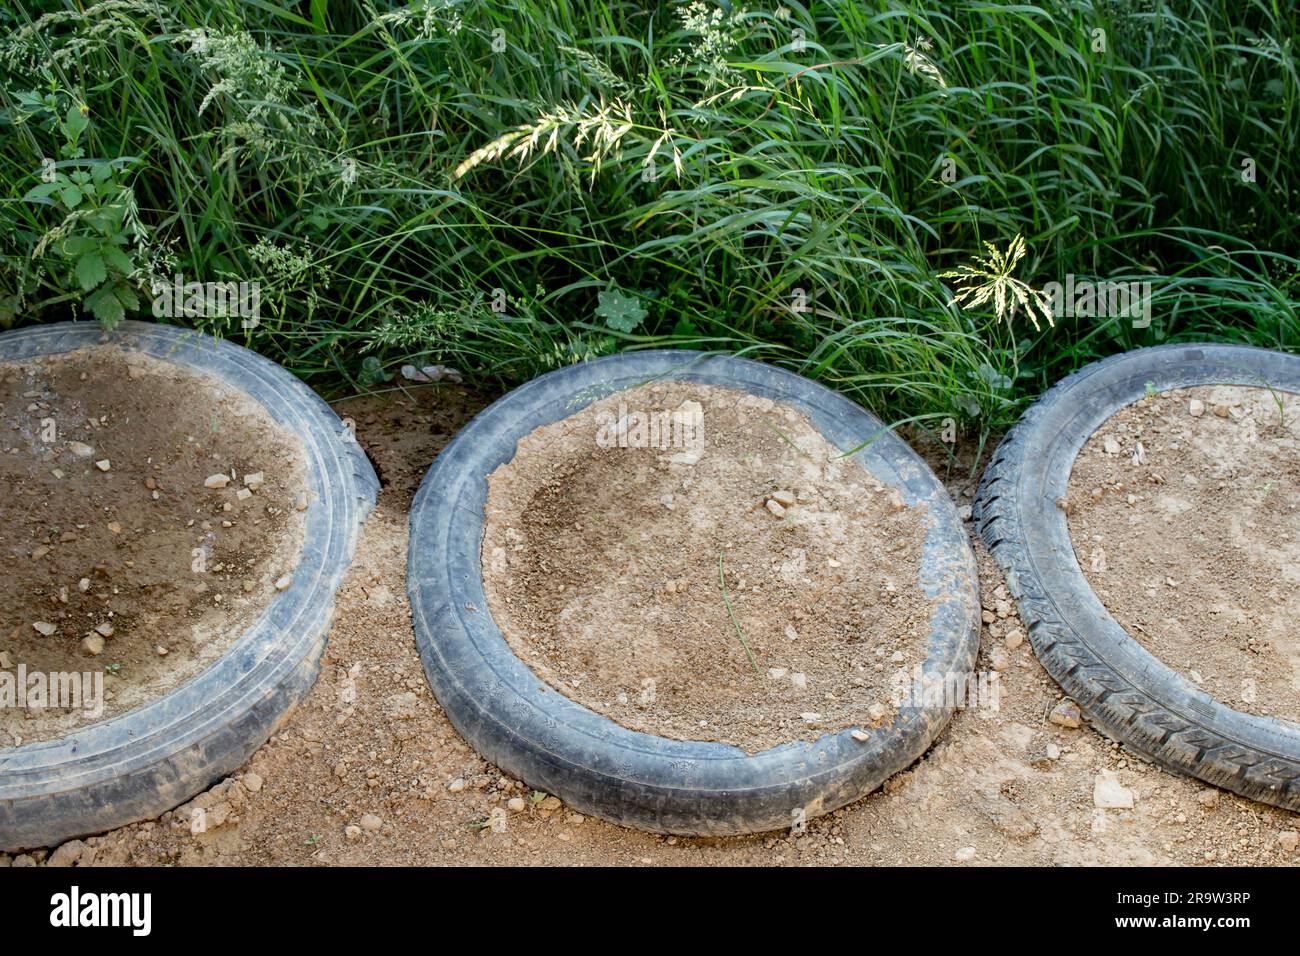 Old tires filled with rammed earth, used for house footing or ground stabilisation. Stock Photo